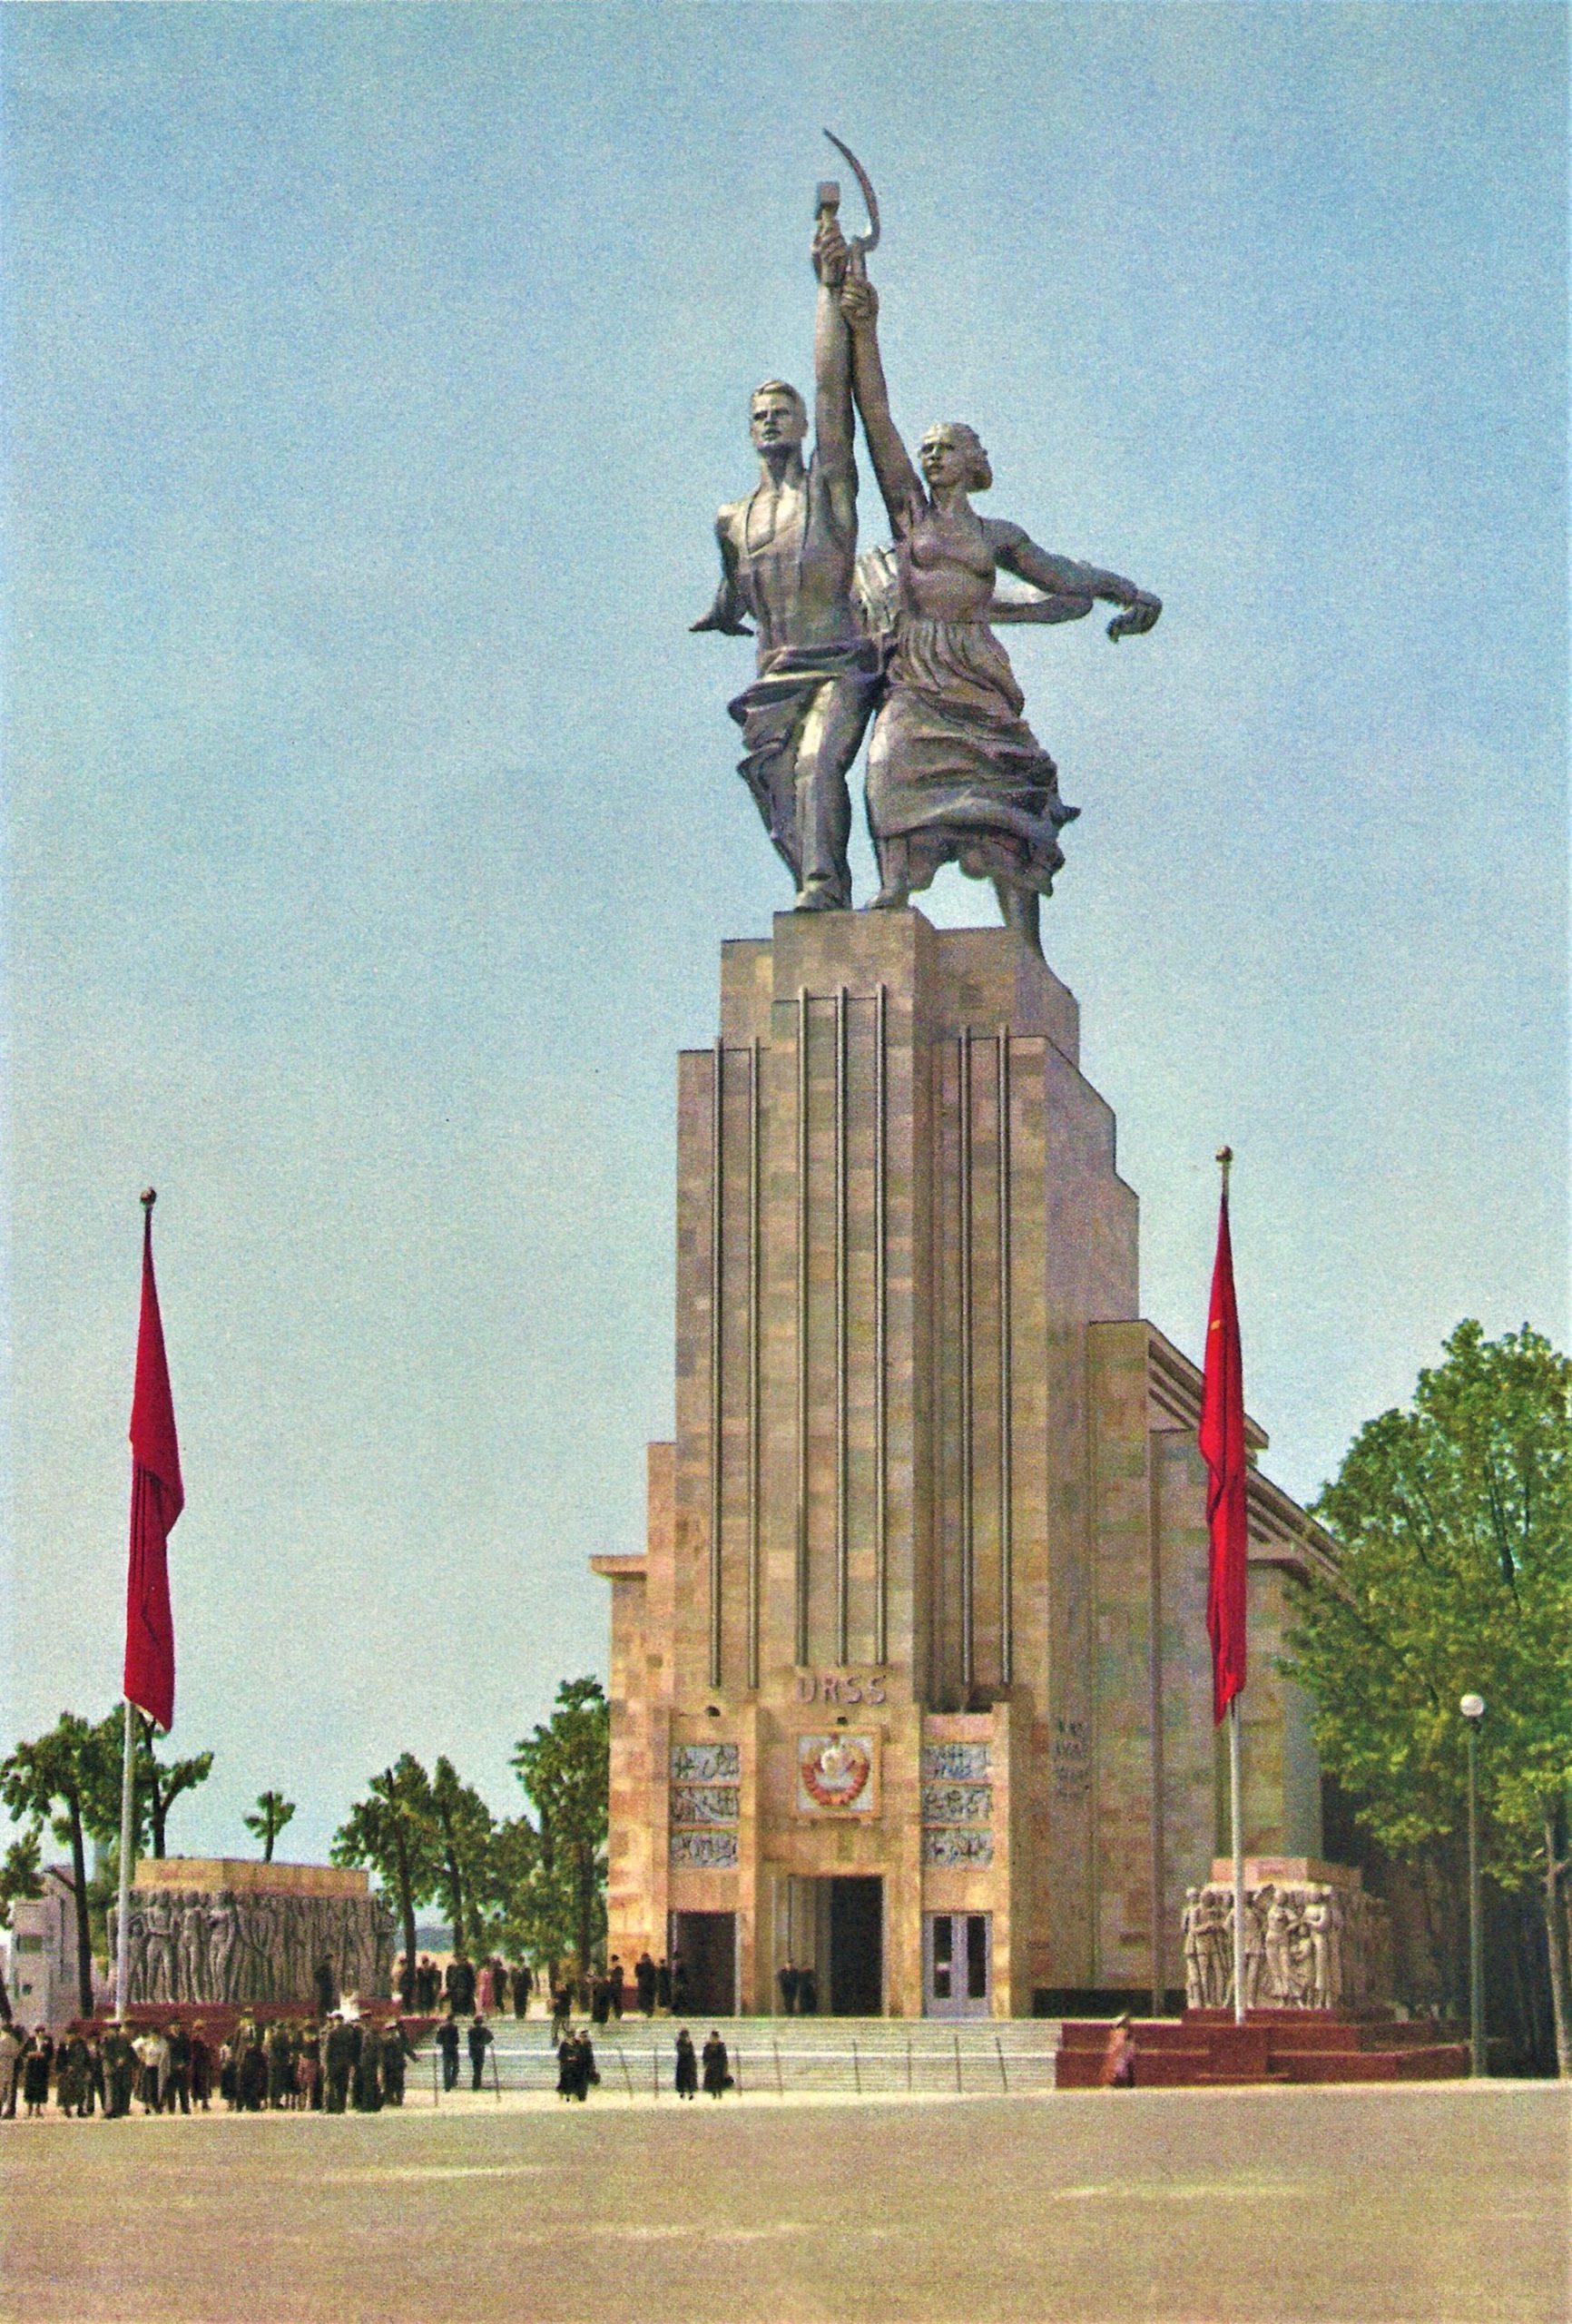  Vera Mukhina, Worker and Kolkhoz Woman, 1937, sculpture, stainless steel, 24.5 m, Russian Exhibition Center, Moscow